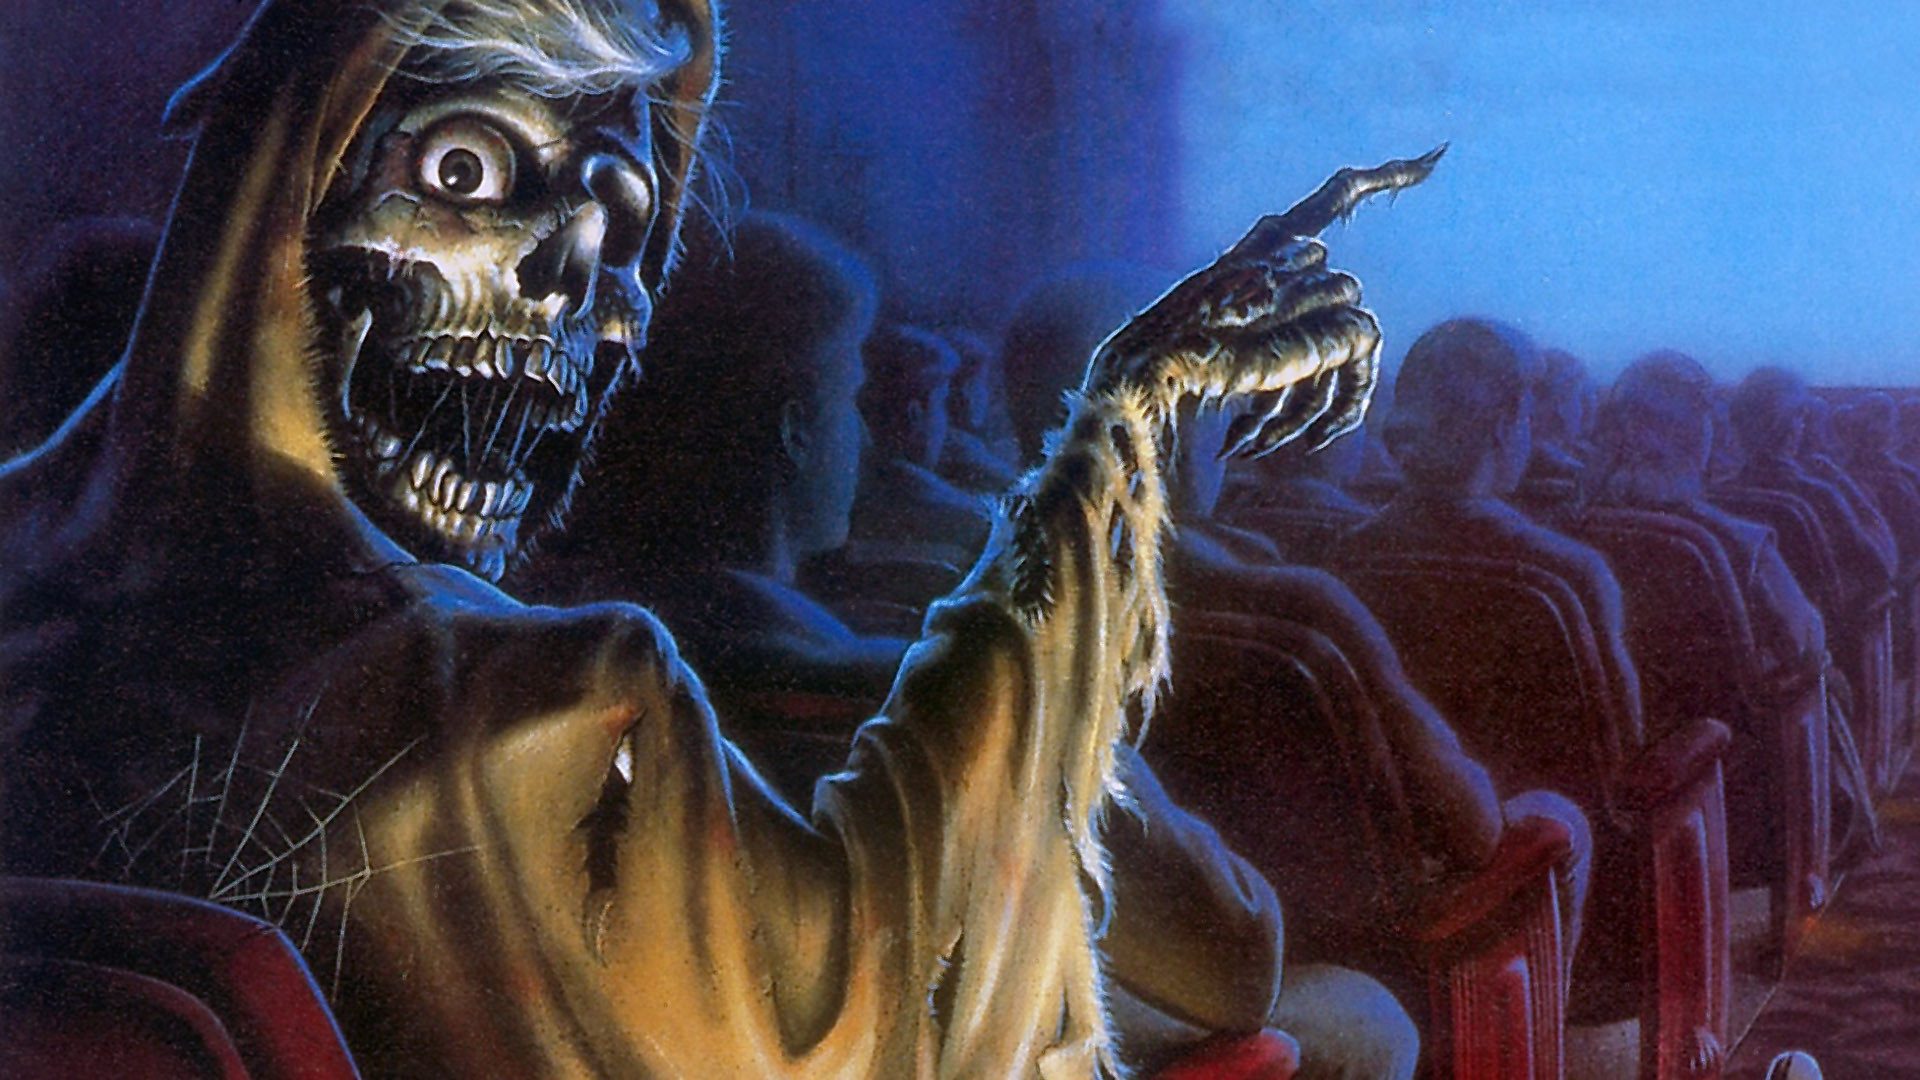 Creepshow 1982 coming in UHD soon from Scream Factory